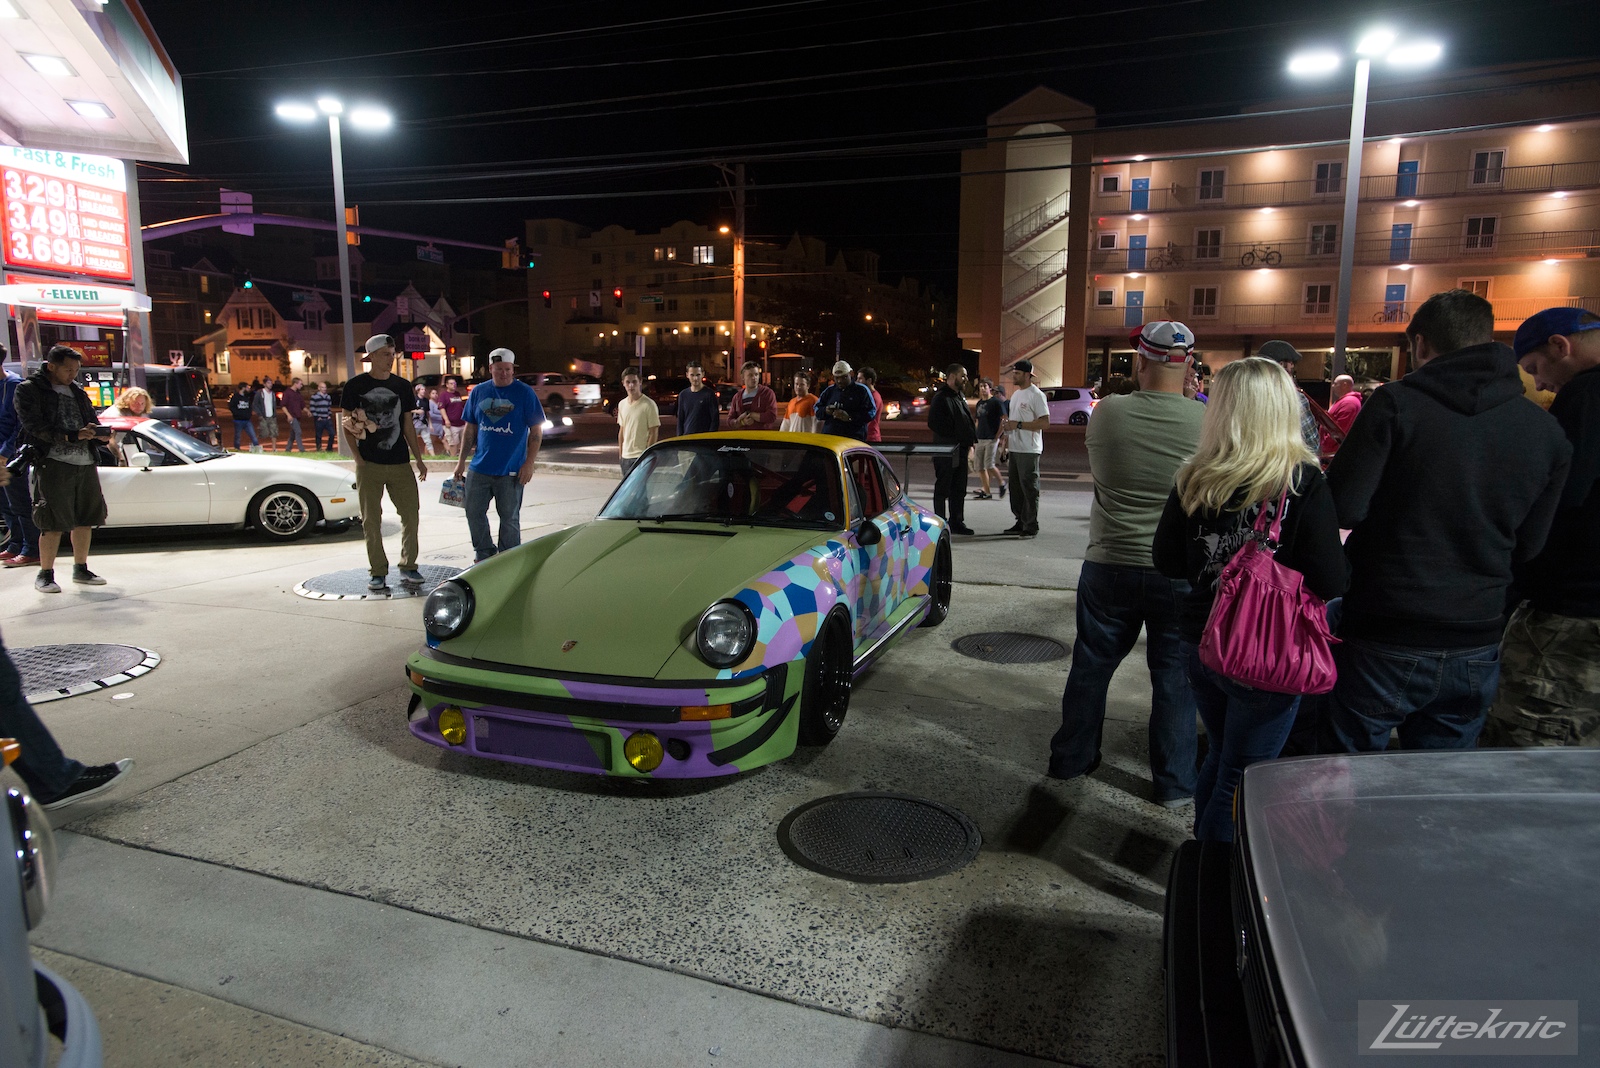 The Lüfteknic #projectstuka Porsche 930 Turbo at 7-11 with bystanders taking in the car.